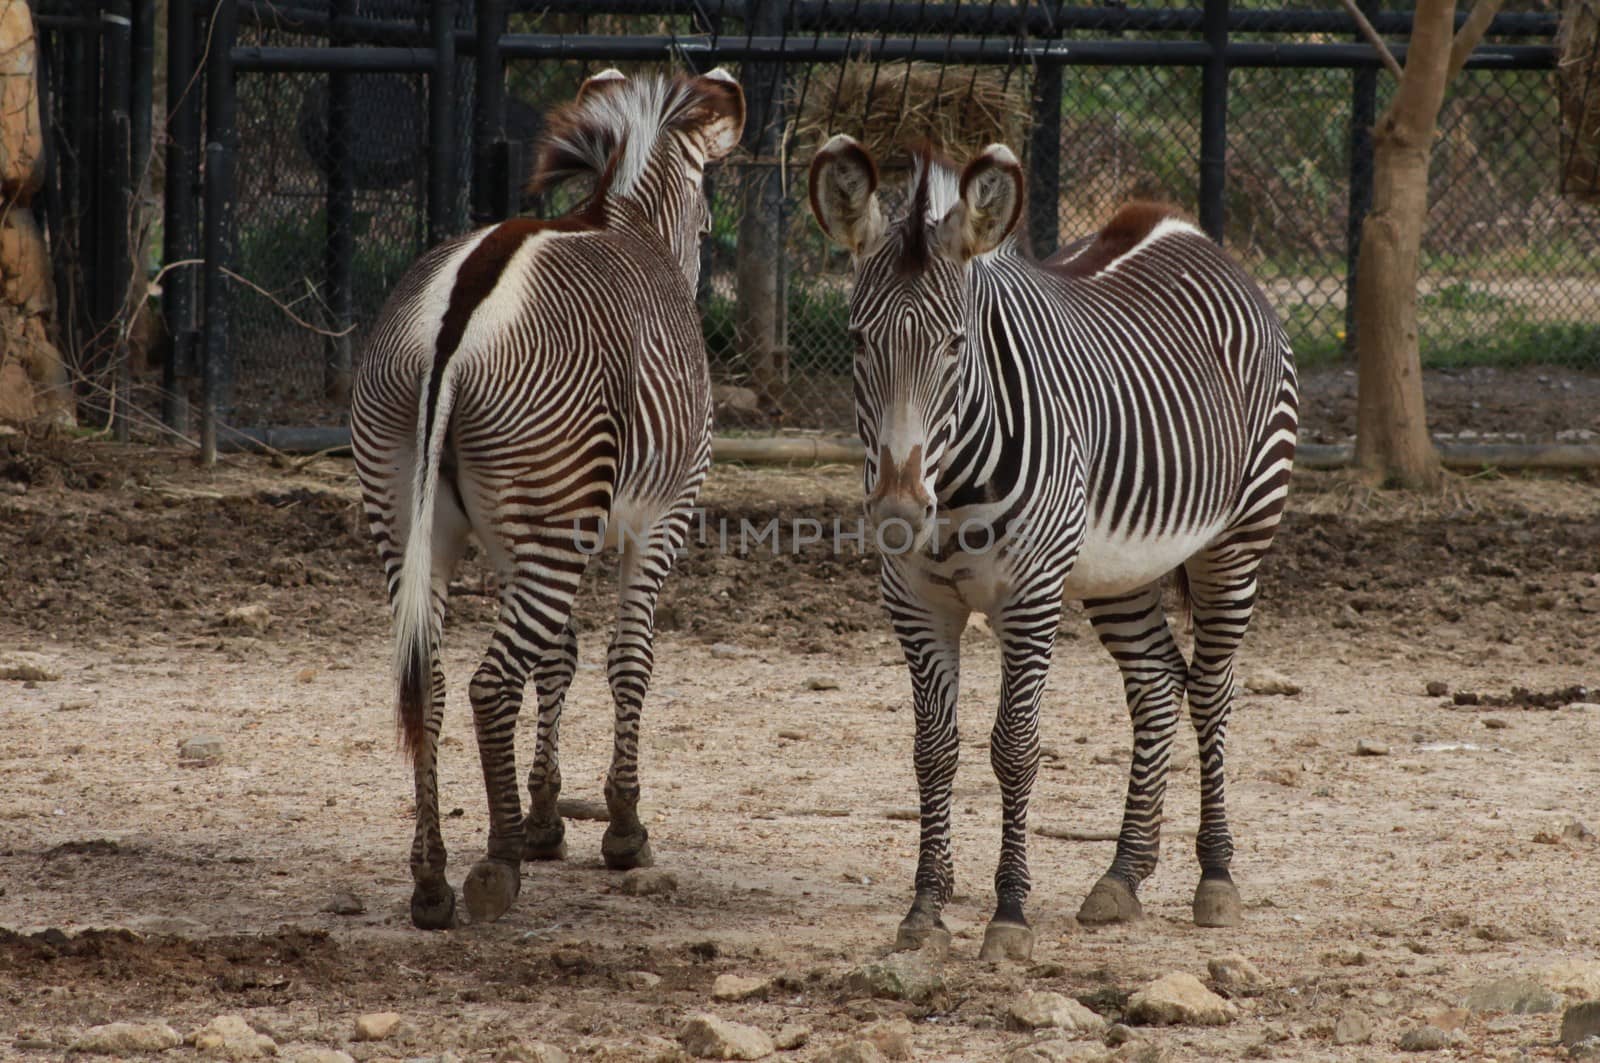 Two zebras standing side-by-side